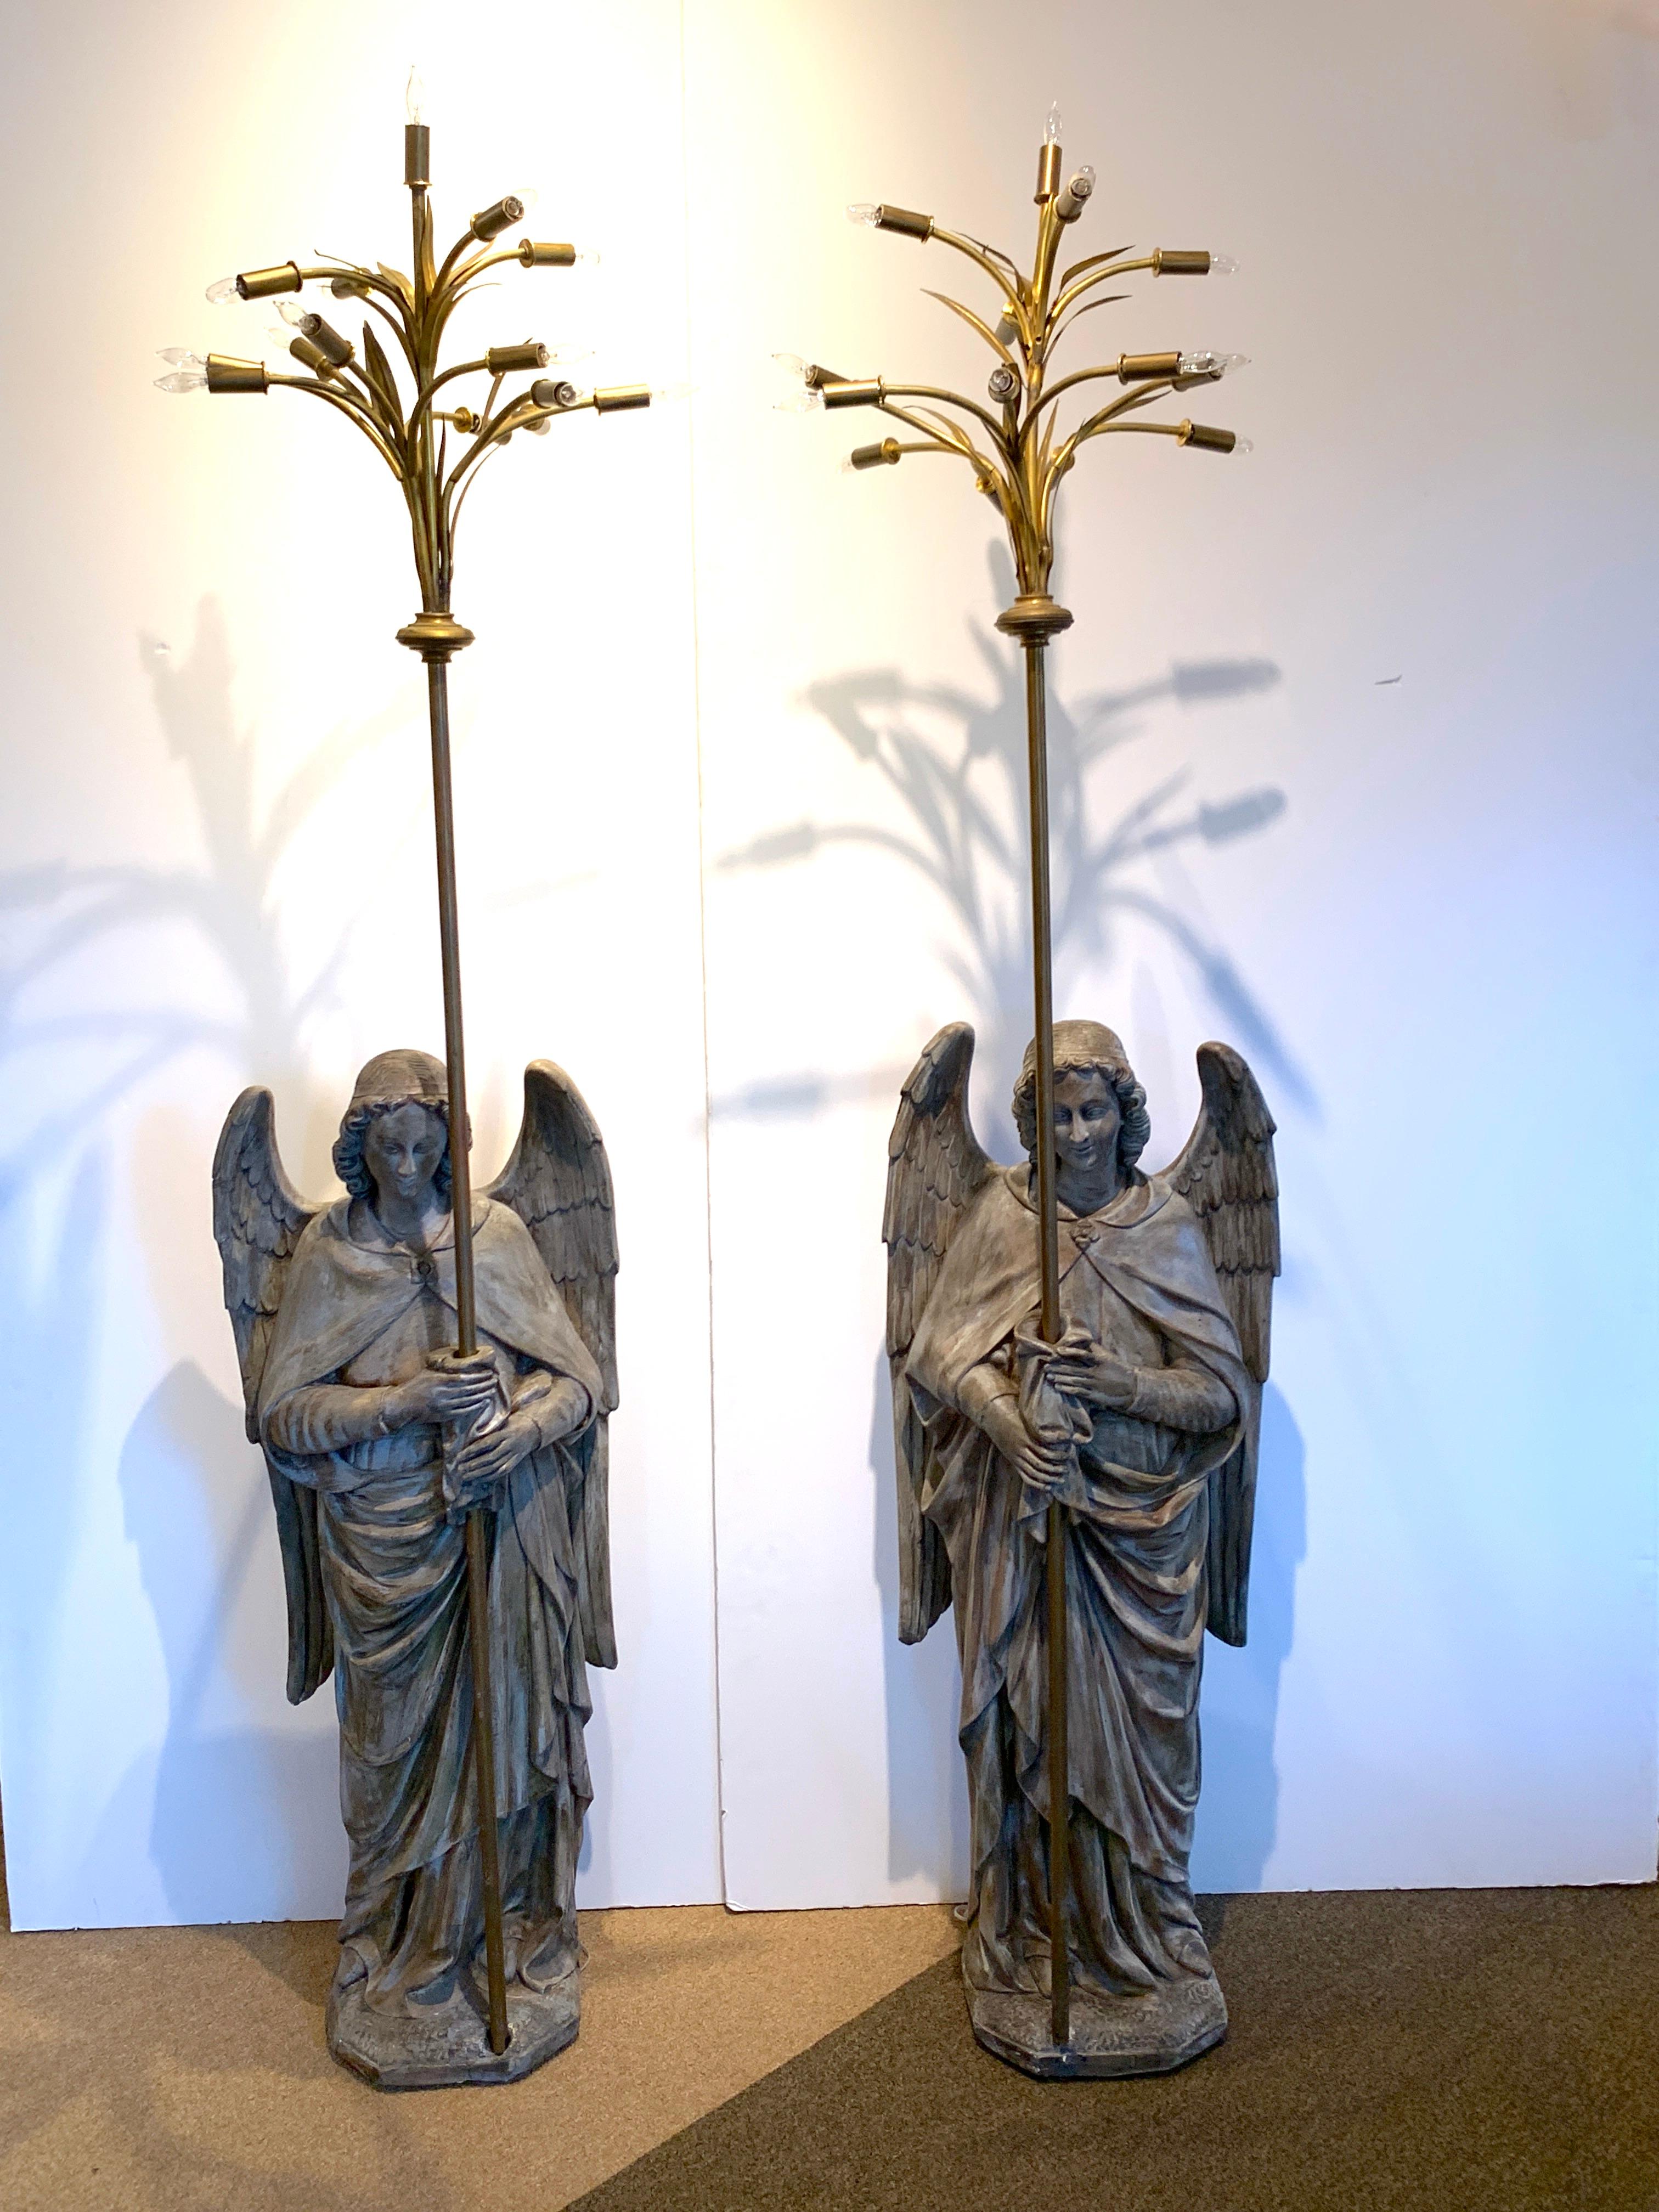 Pair of antique Ecclesiastical Angel torchieres, 7' tall
Each angel standing 48